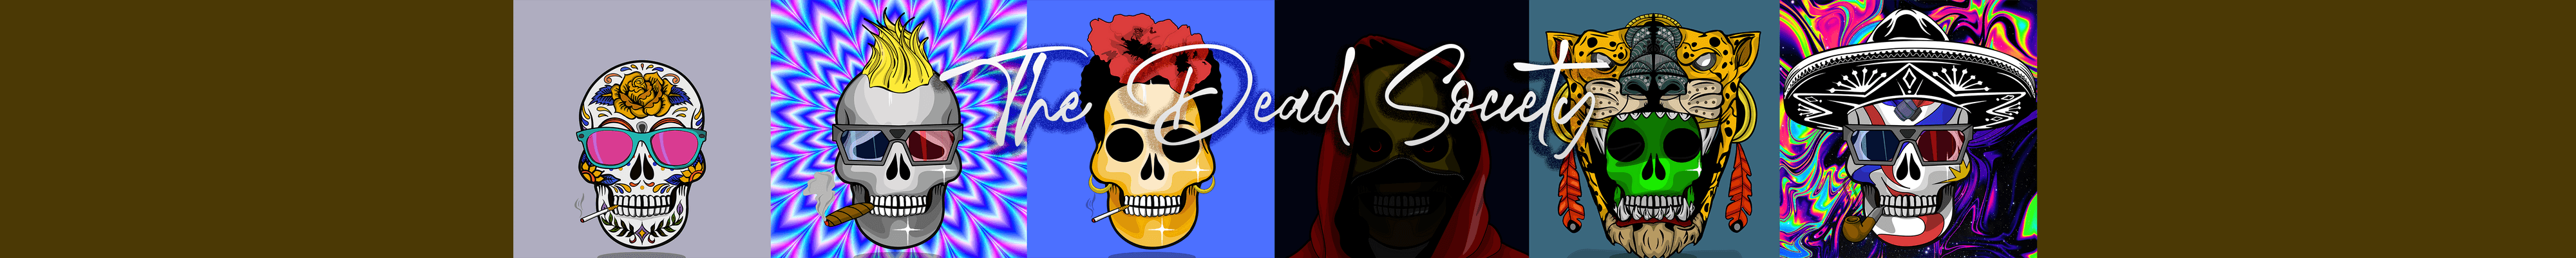 TheDeadSociety banner